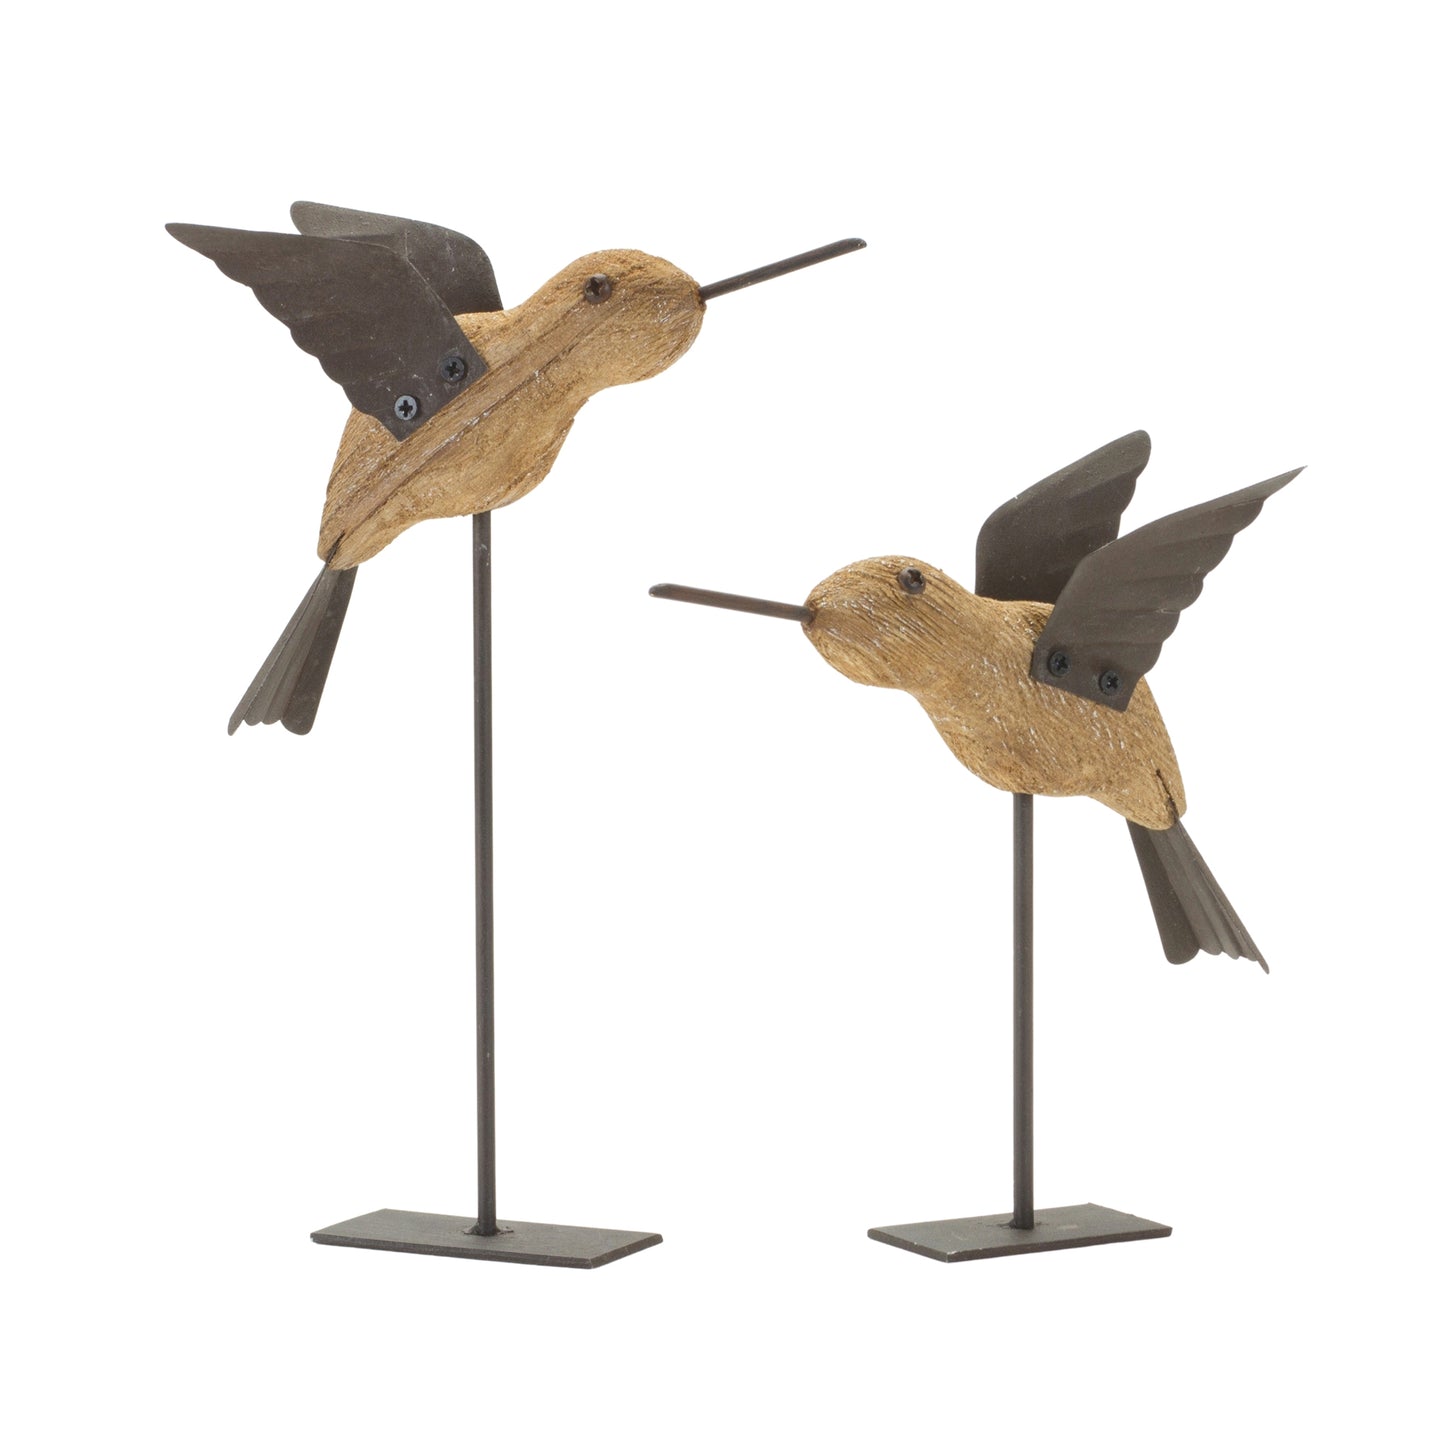 Natural Fir Wood Bird Figurine with Rustic Metal Accents (Set of 2)